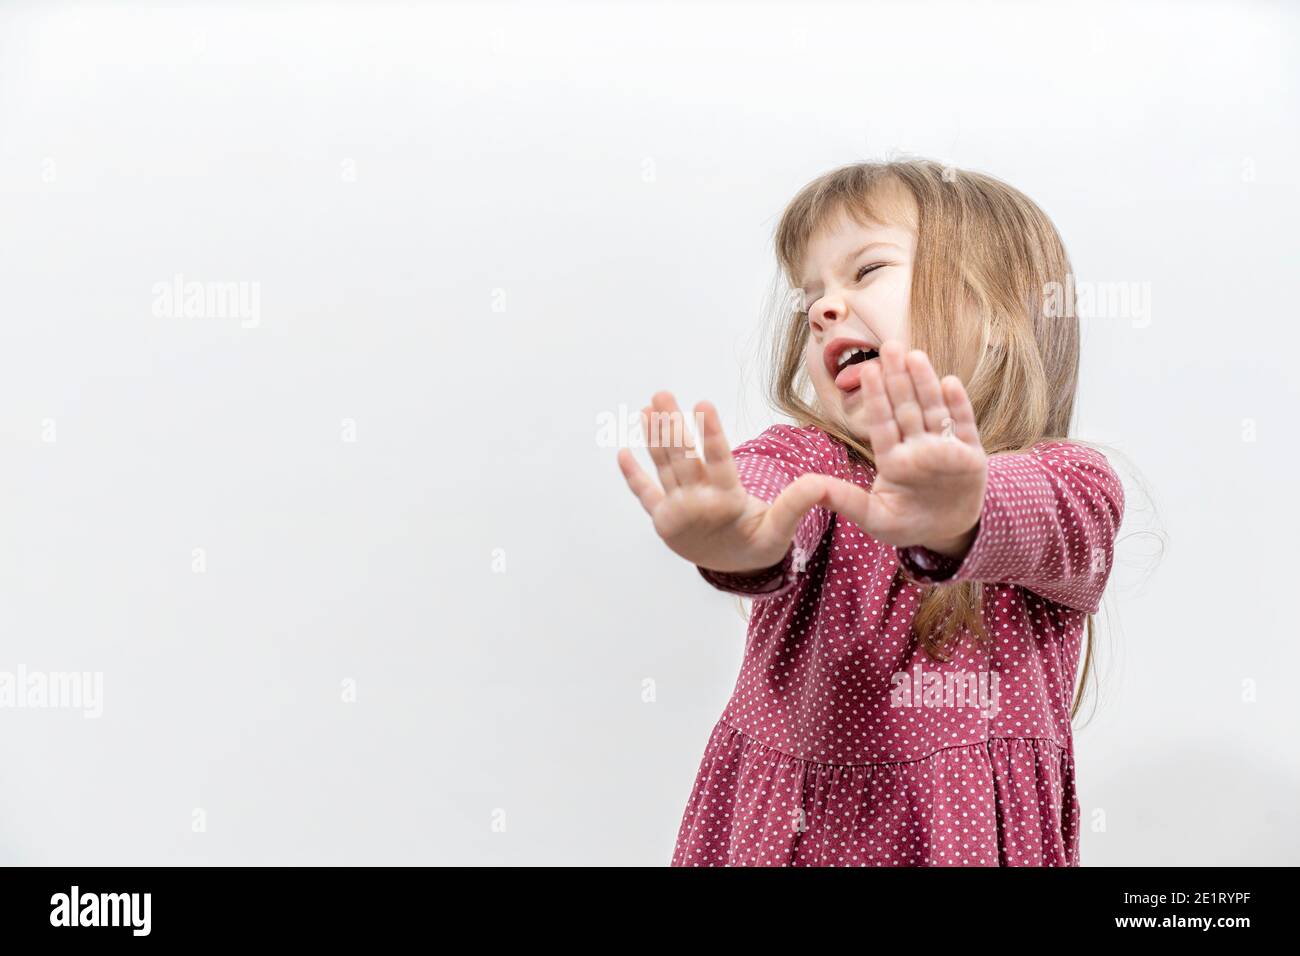 the little girl threw her arms forward in a rejection position. human emotions. mock up with copy space Stock Photo